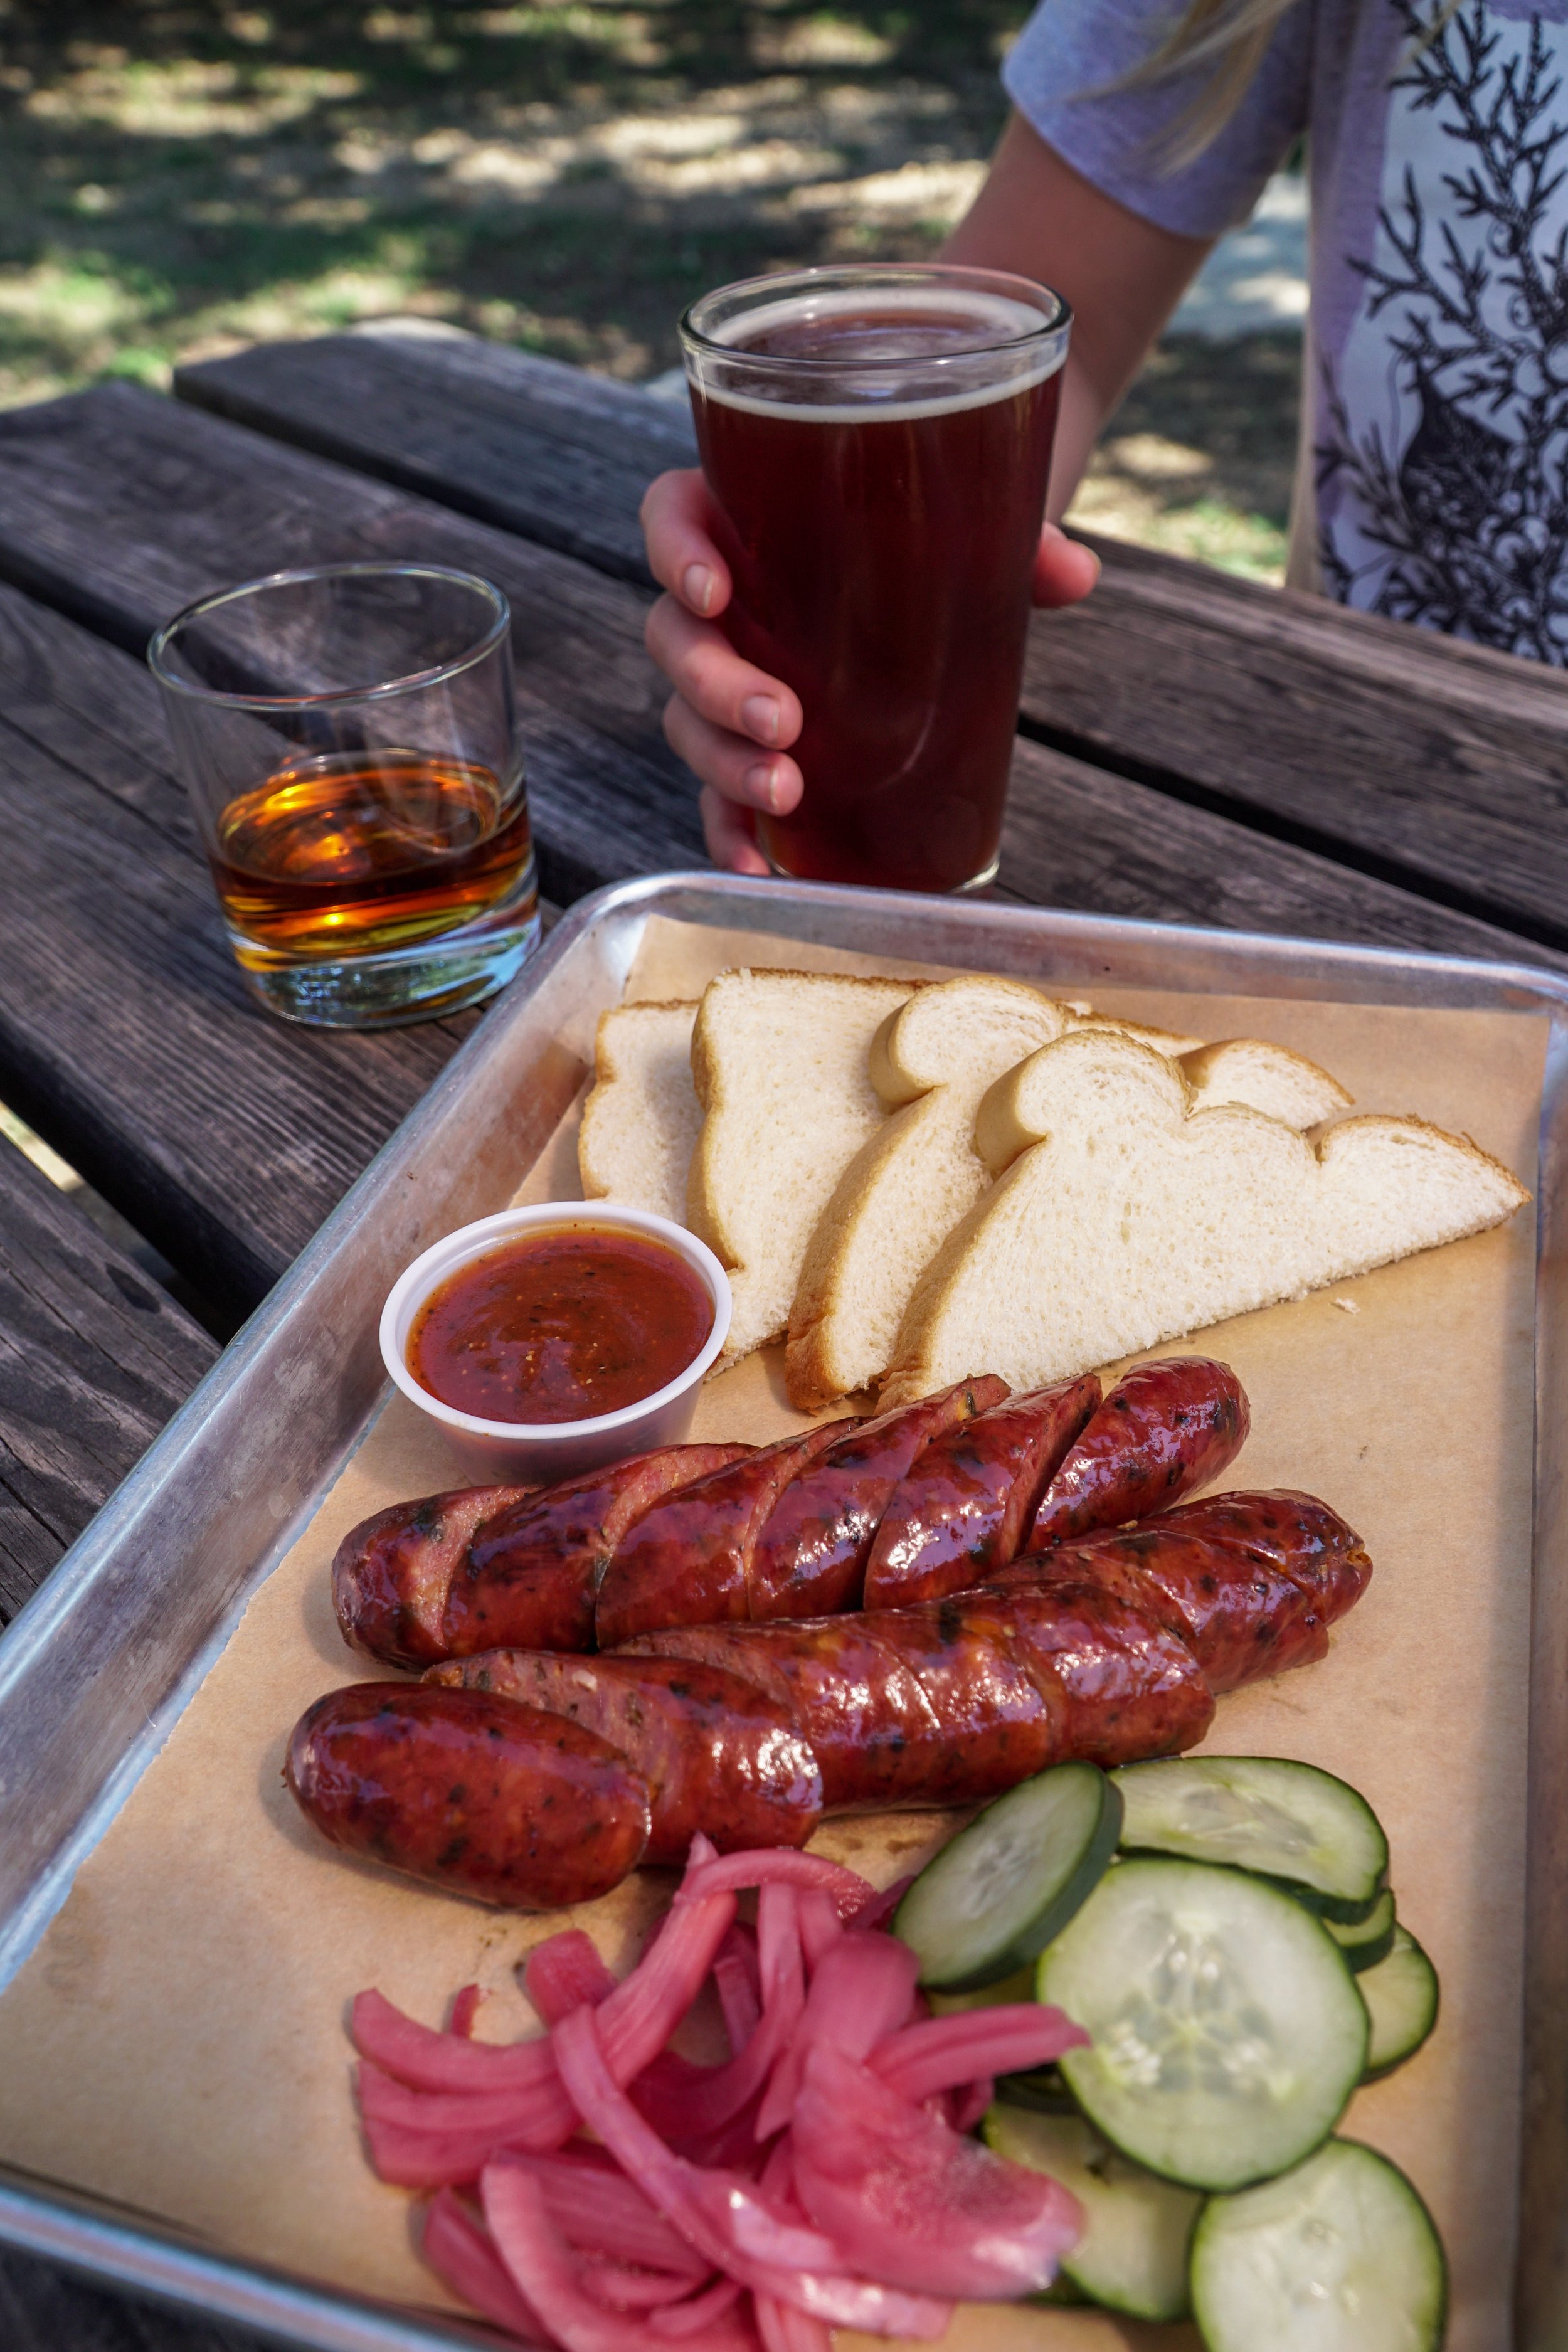 plate of sliced sausage with side of bread, pickles, pint of beer and glass of Treaty Oak whiskey